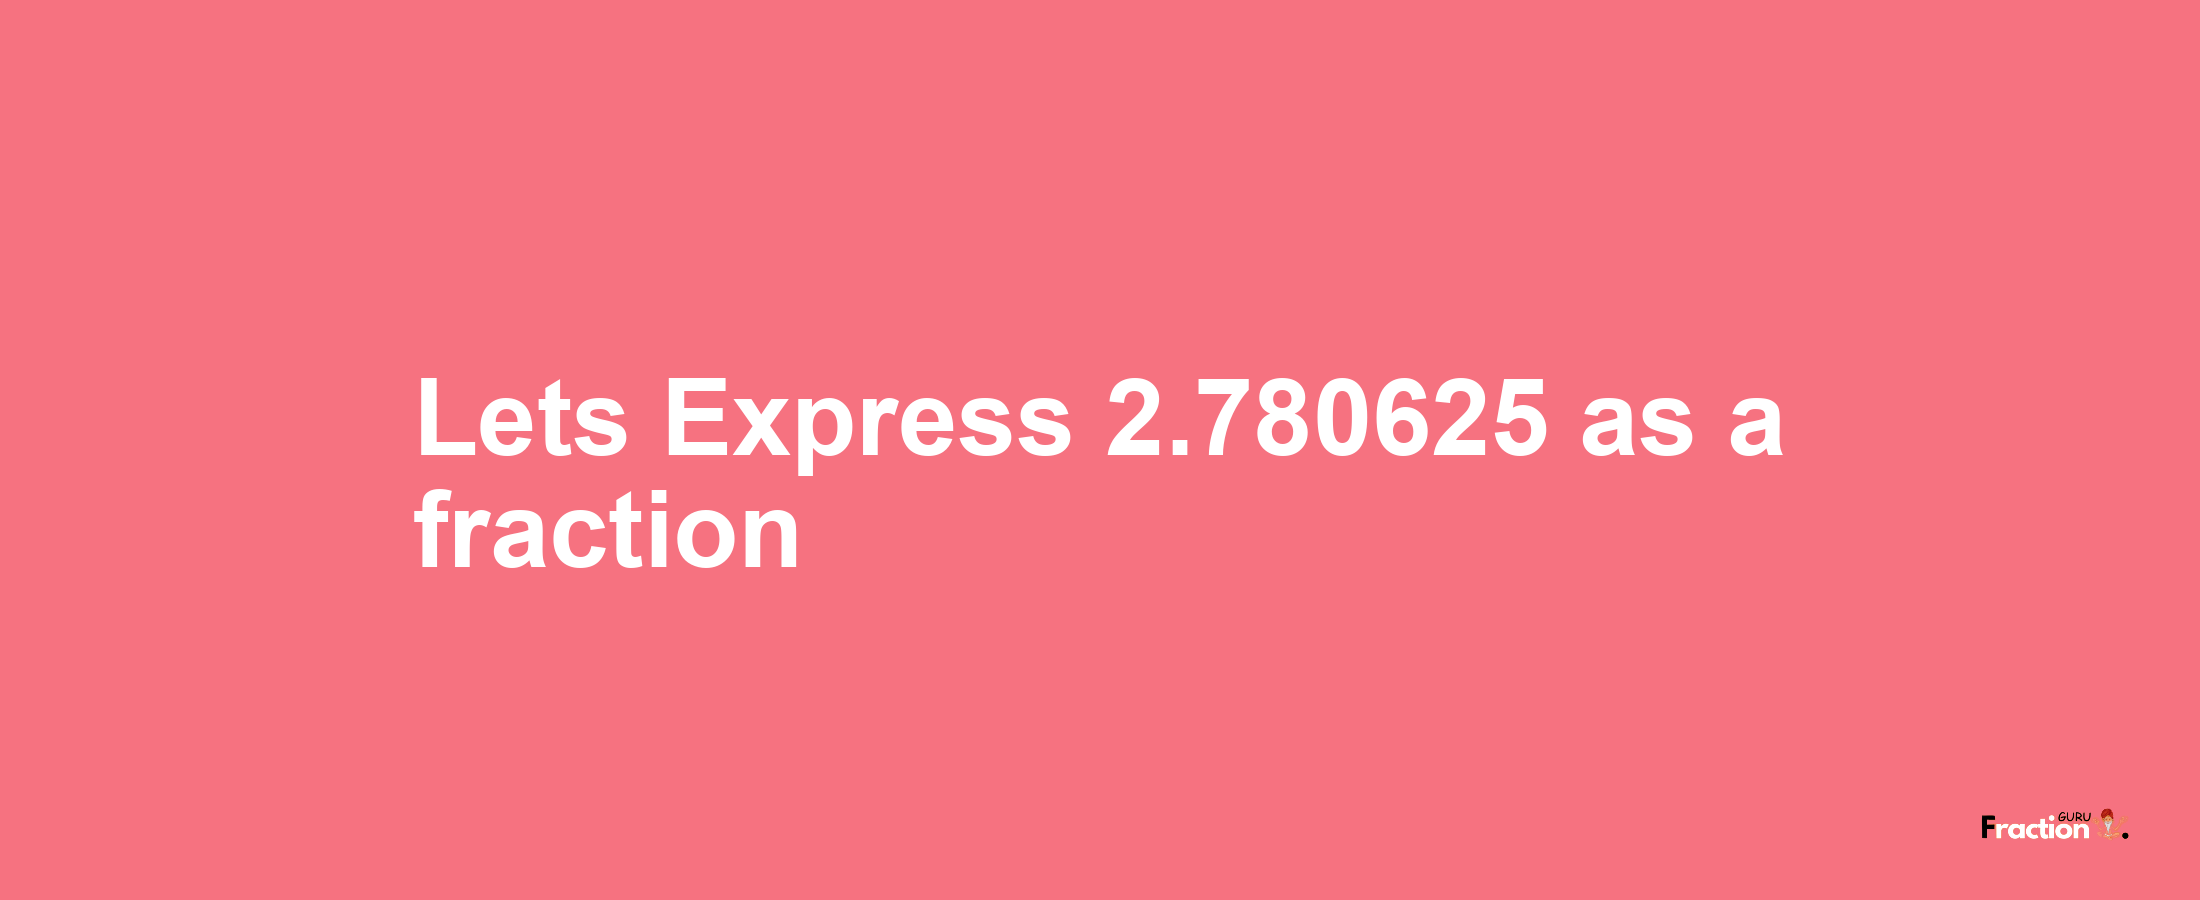 Lets Express 2.780625 as afraction